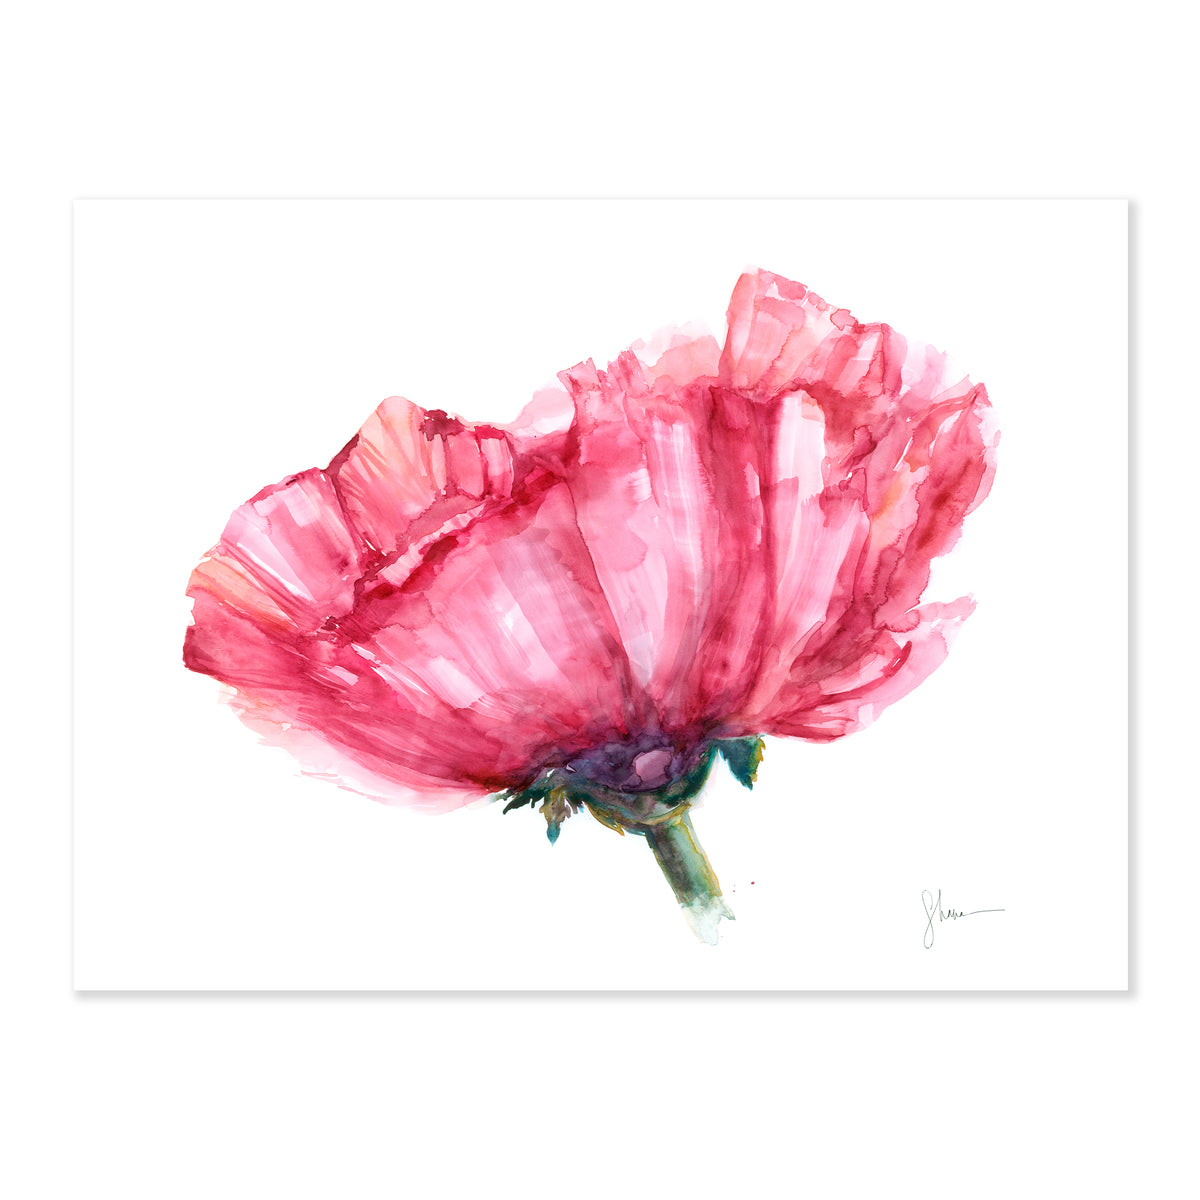 A fine art print illustrating the side profile of a single pink poppy painted in watercolor on a soft white background